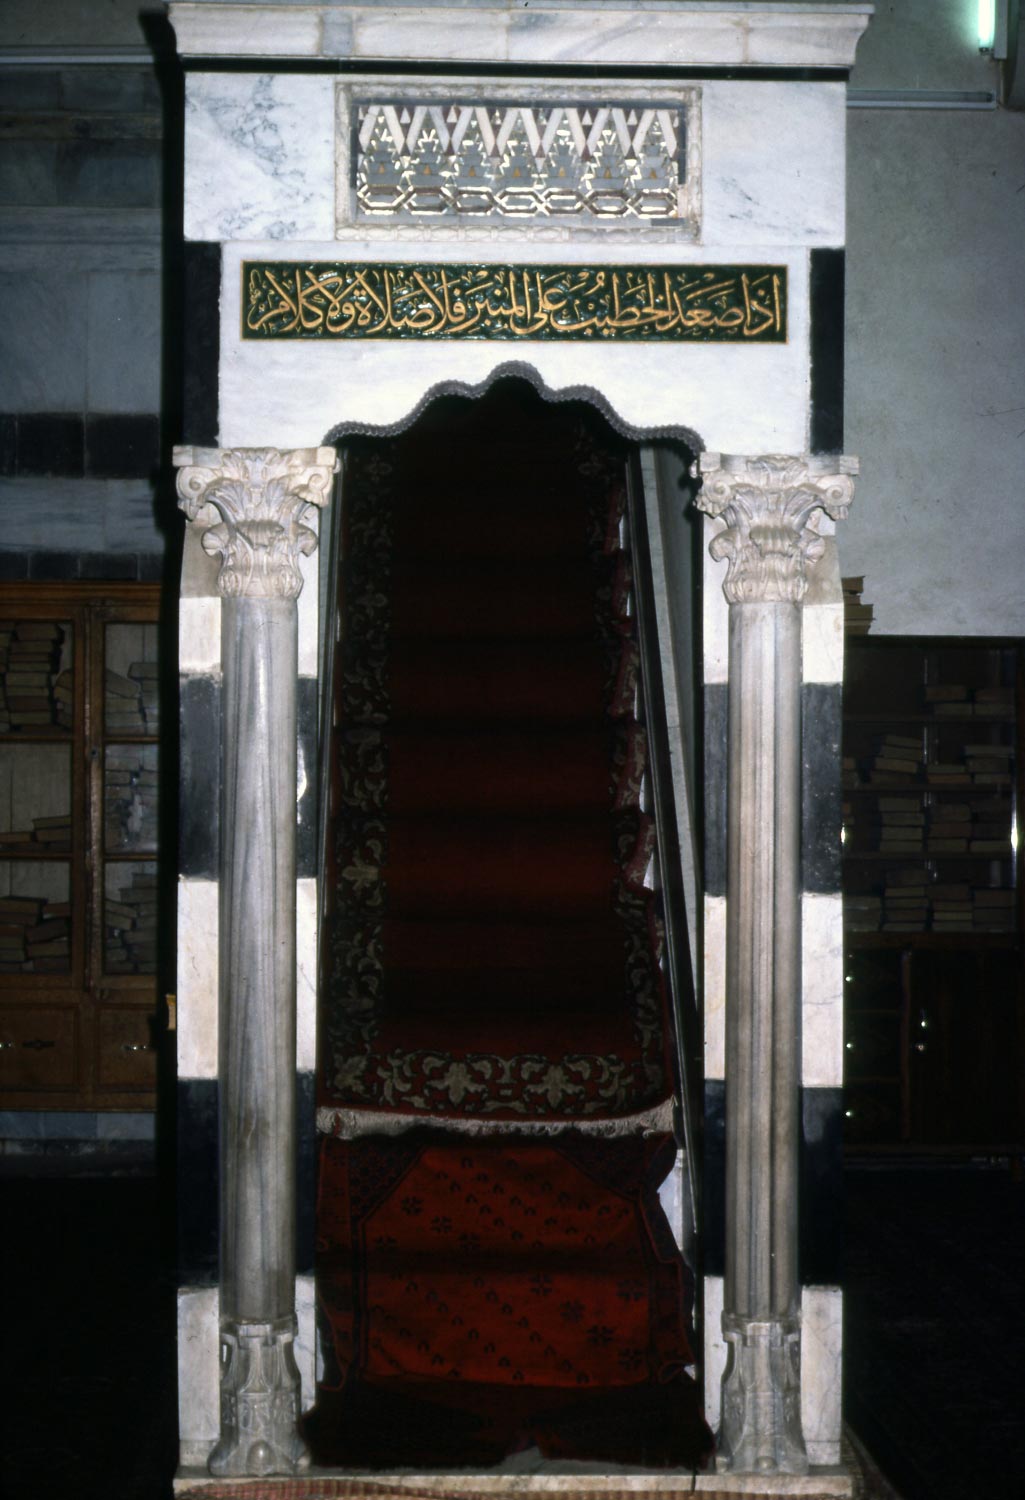 Detail of the inscription on the front of the minbar